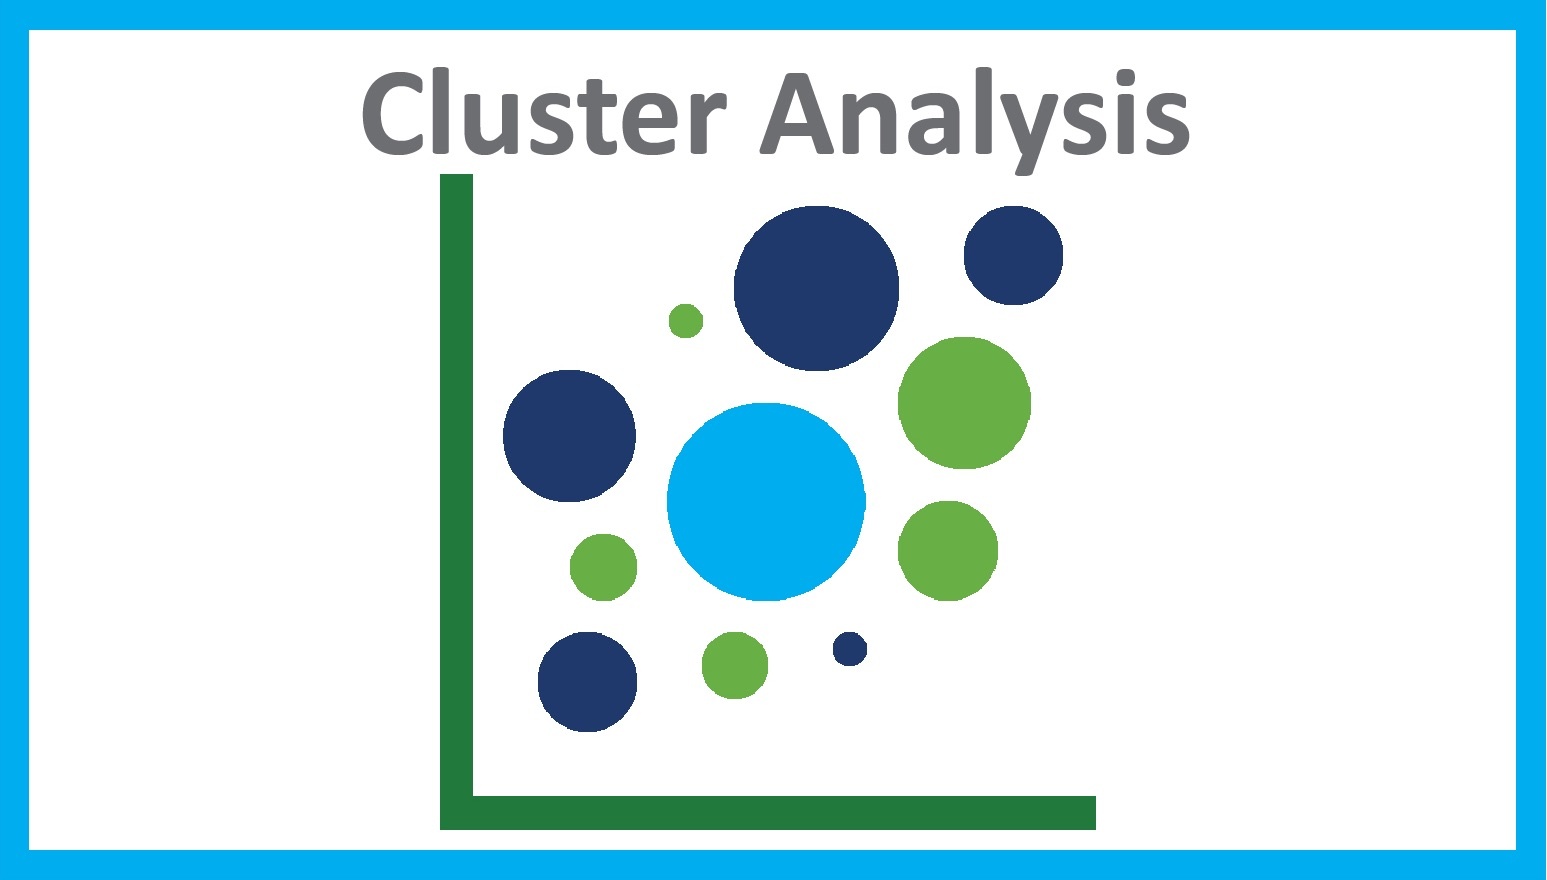 What is Cluster Analysis in Machine Learning